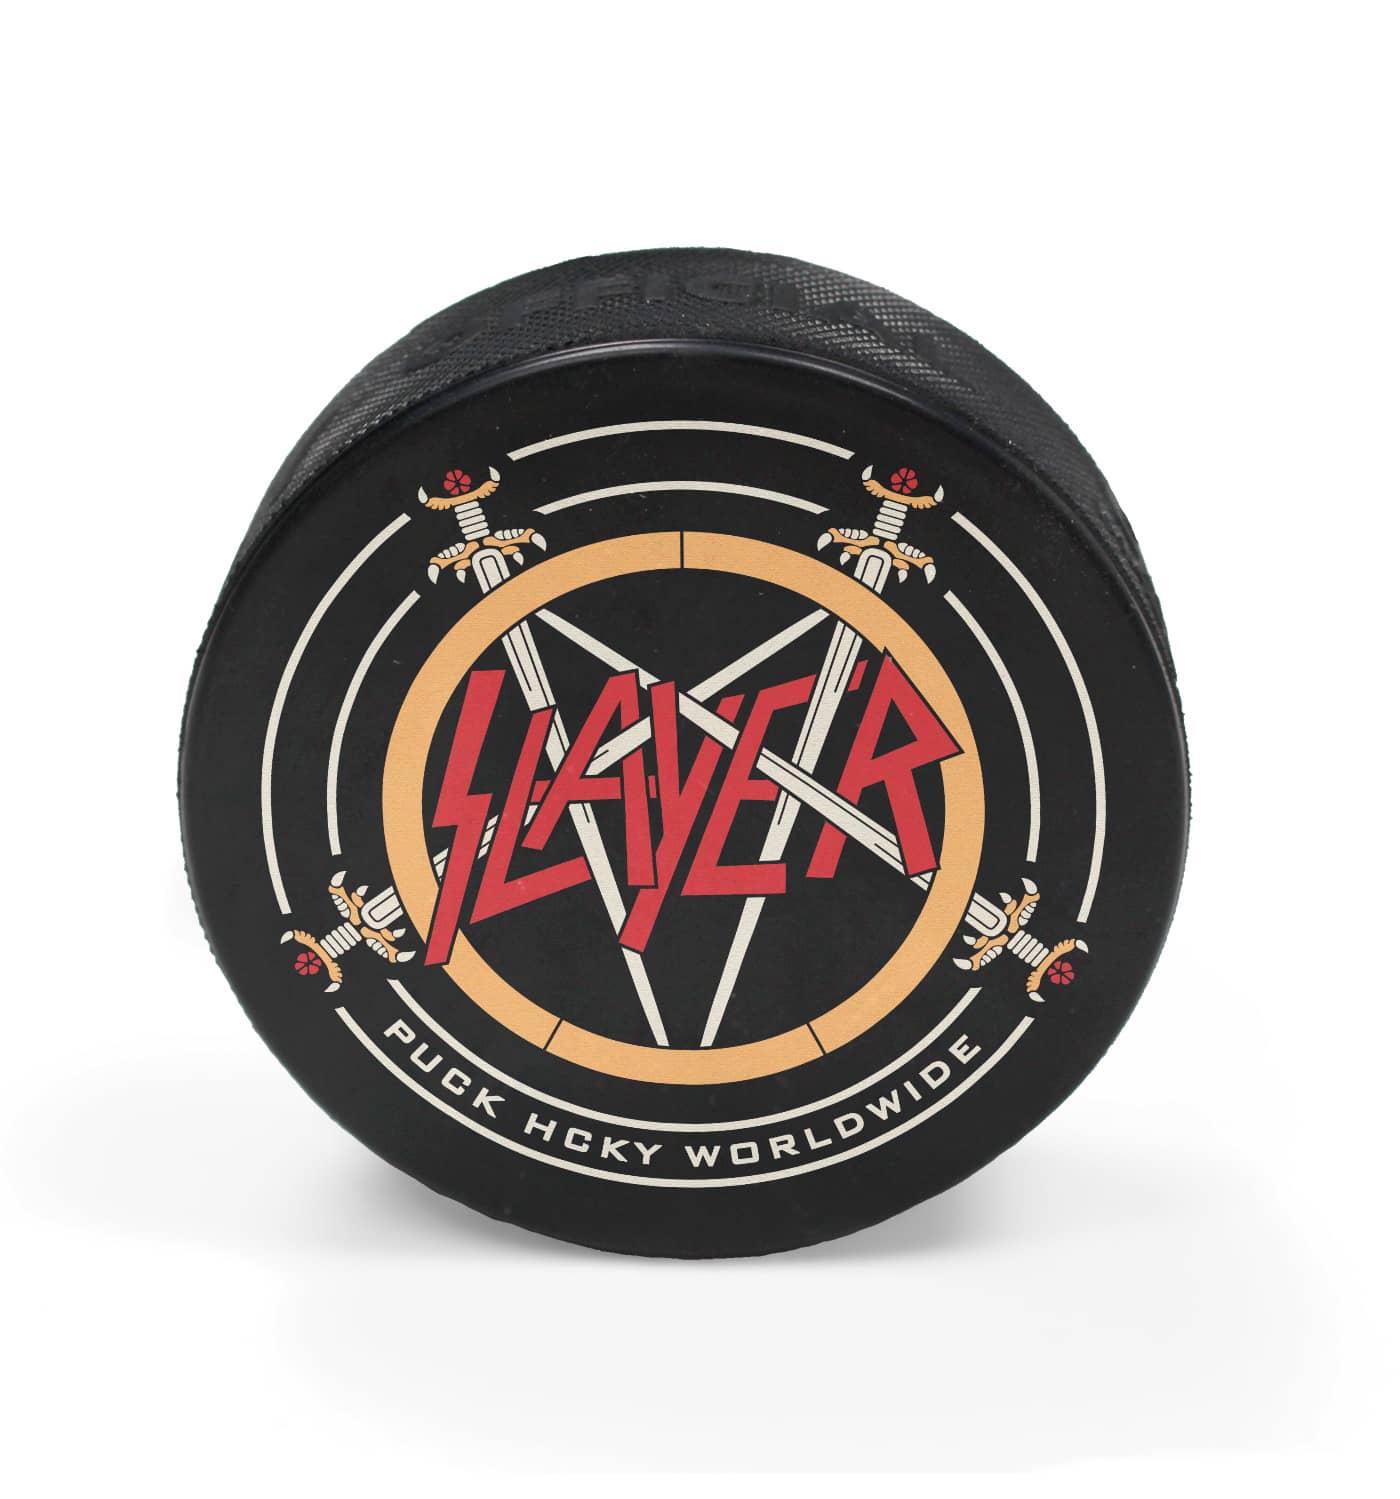 SLAYER 'REIGN IN BLOOD' limited edition hockey puck